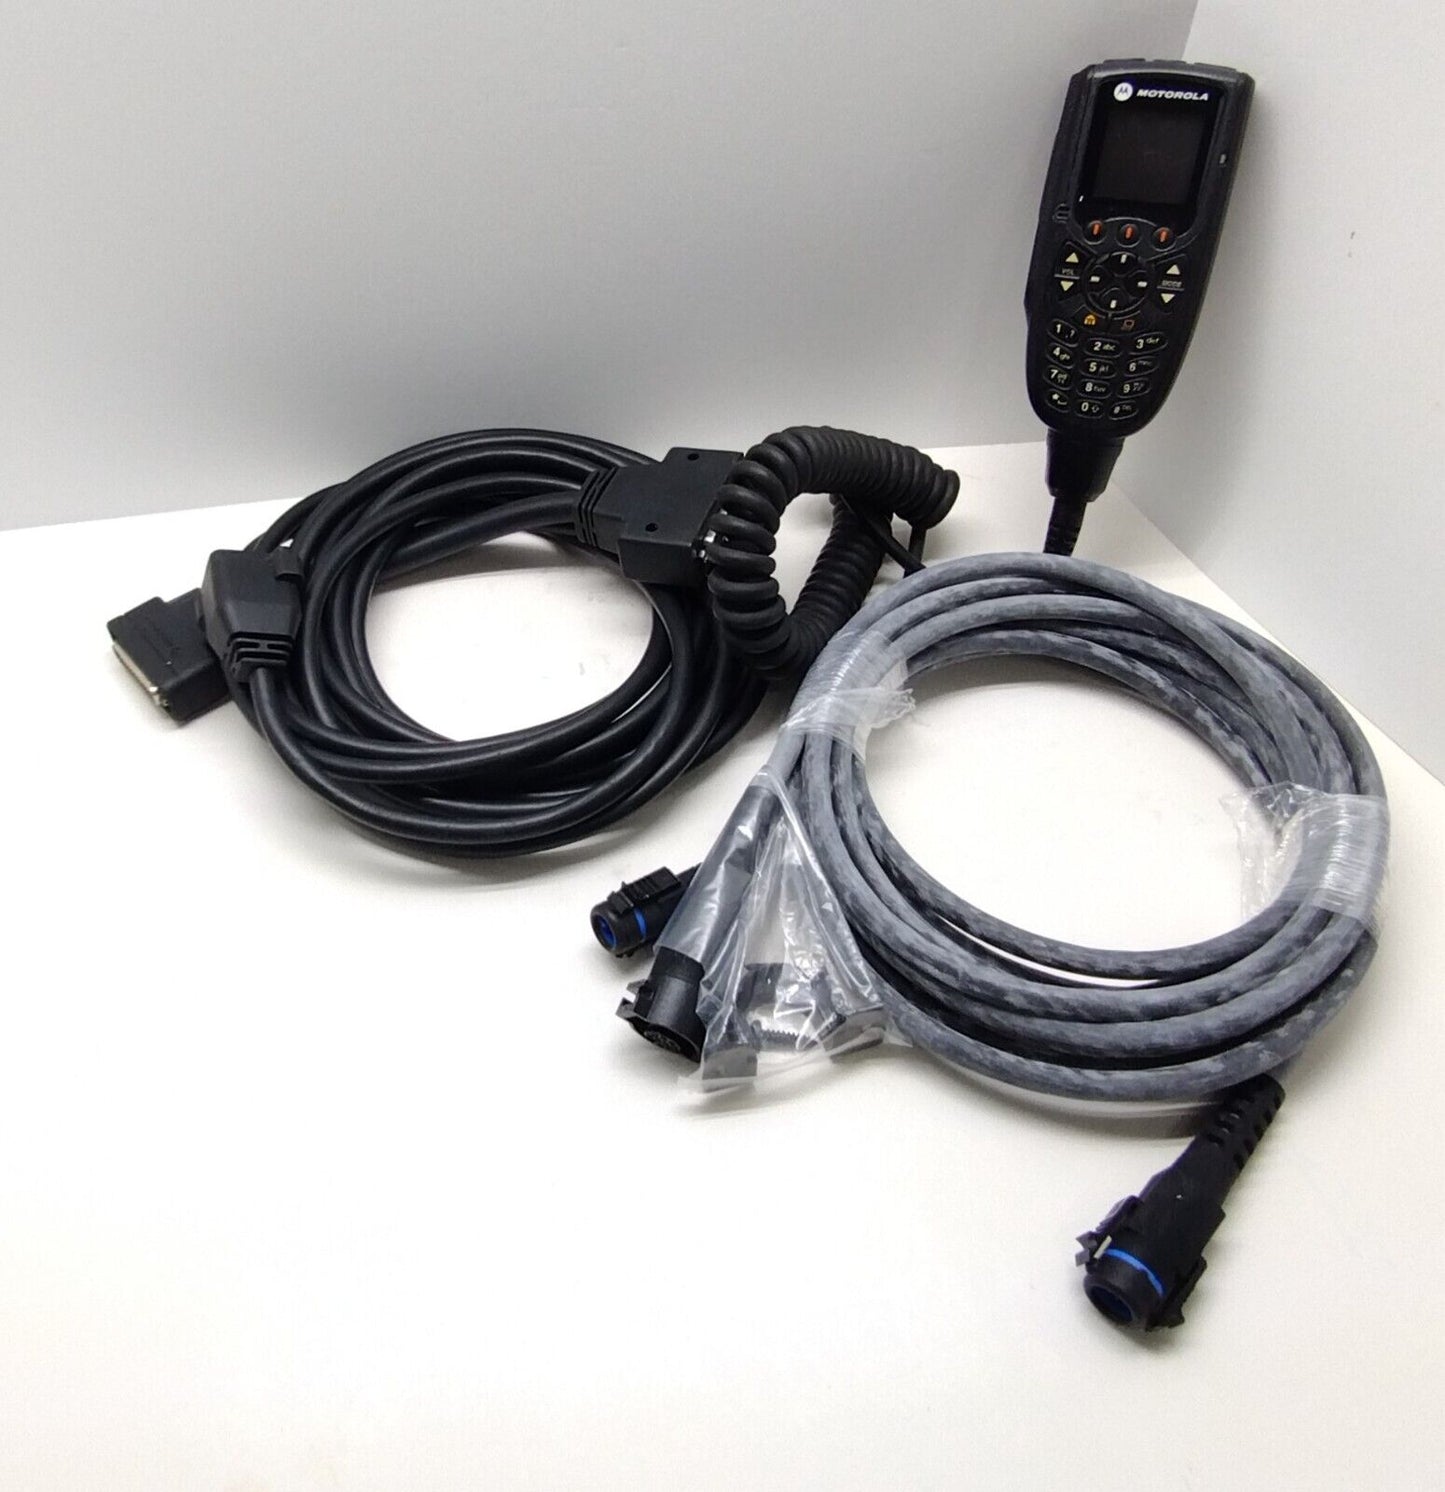 MOTOROLA  HANDHELD 03 Control Head APX8500 APX6500 XTL5000 with accessory cables